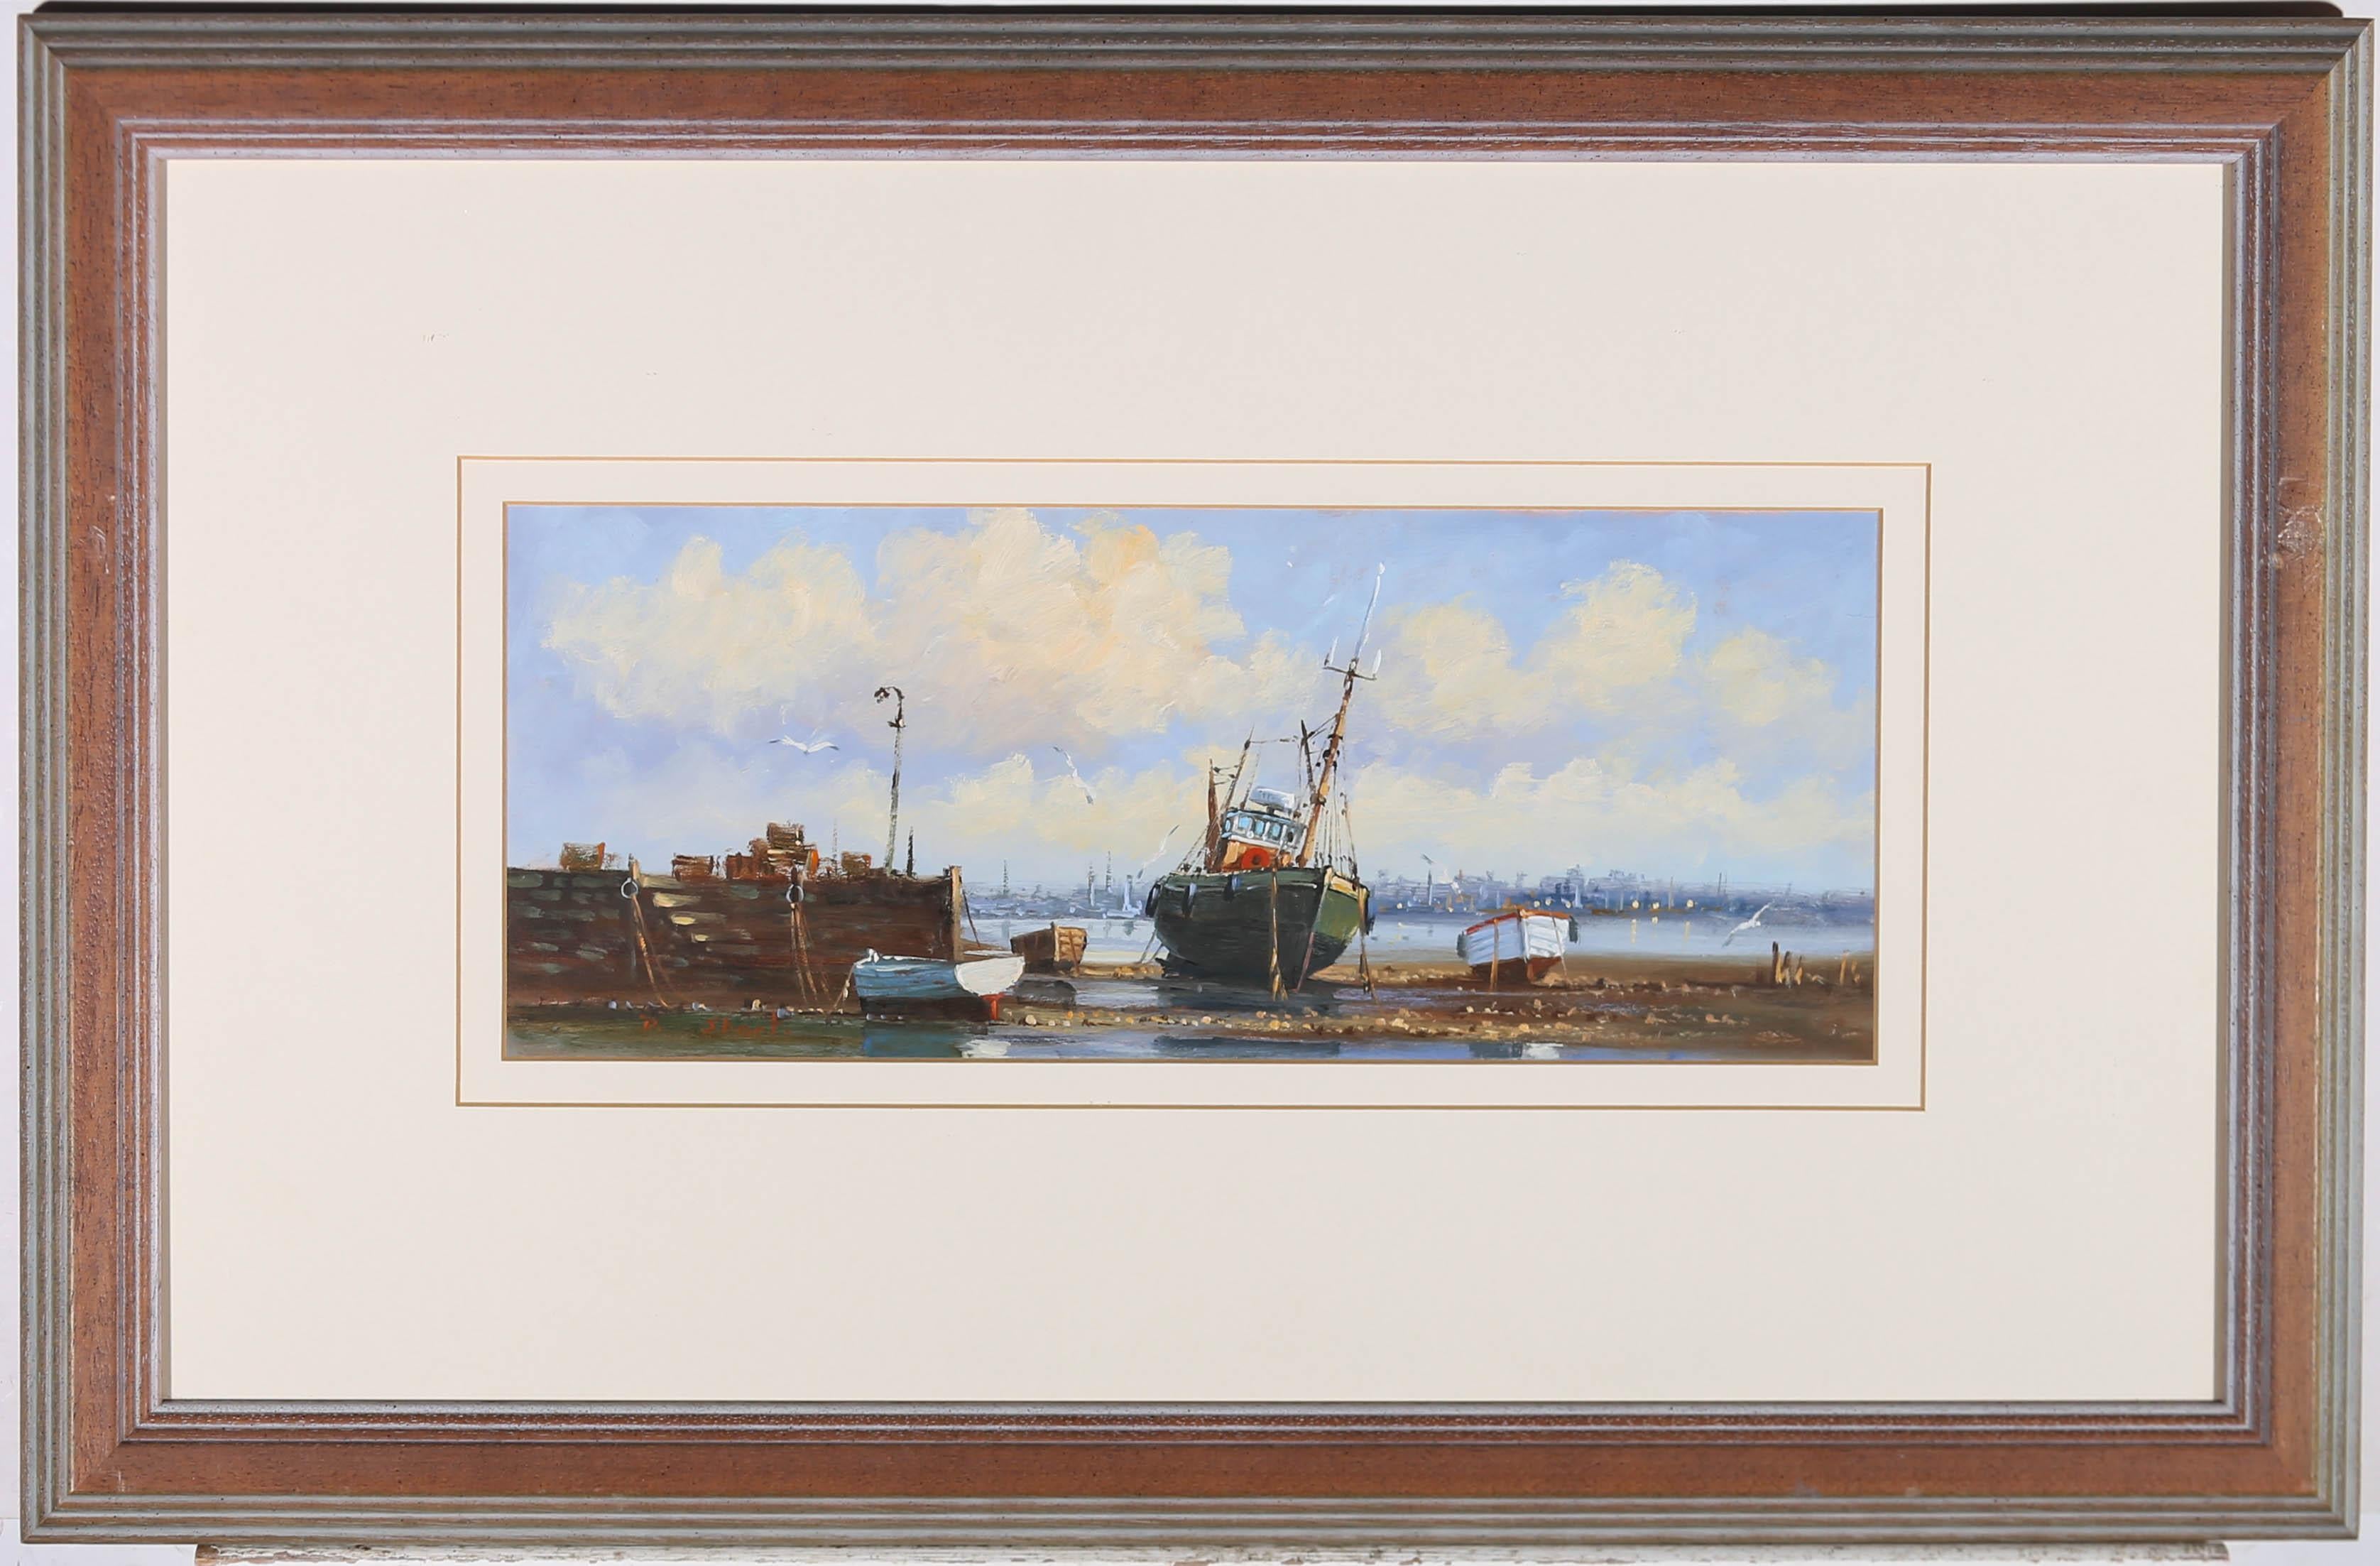 A delightful oil study of various boats docked at sunrise. We can see the tide is coming in and the seagulls have flown away from the lines. Signed to the lower left and well presented in a double card mount and modern frame. On wove.